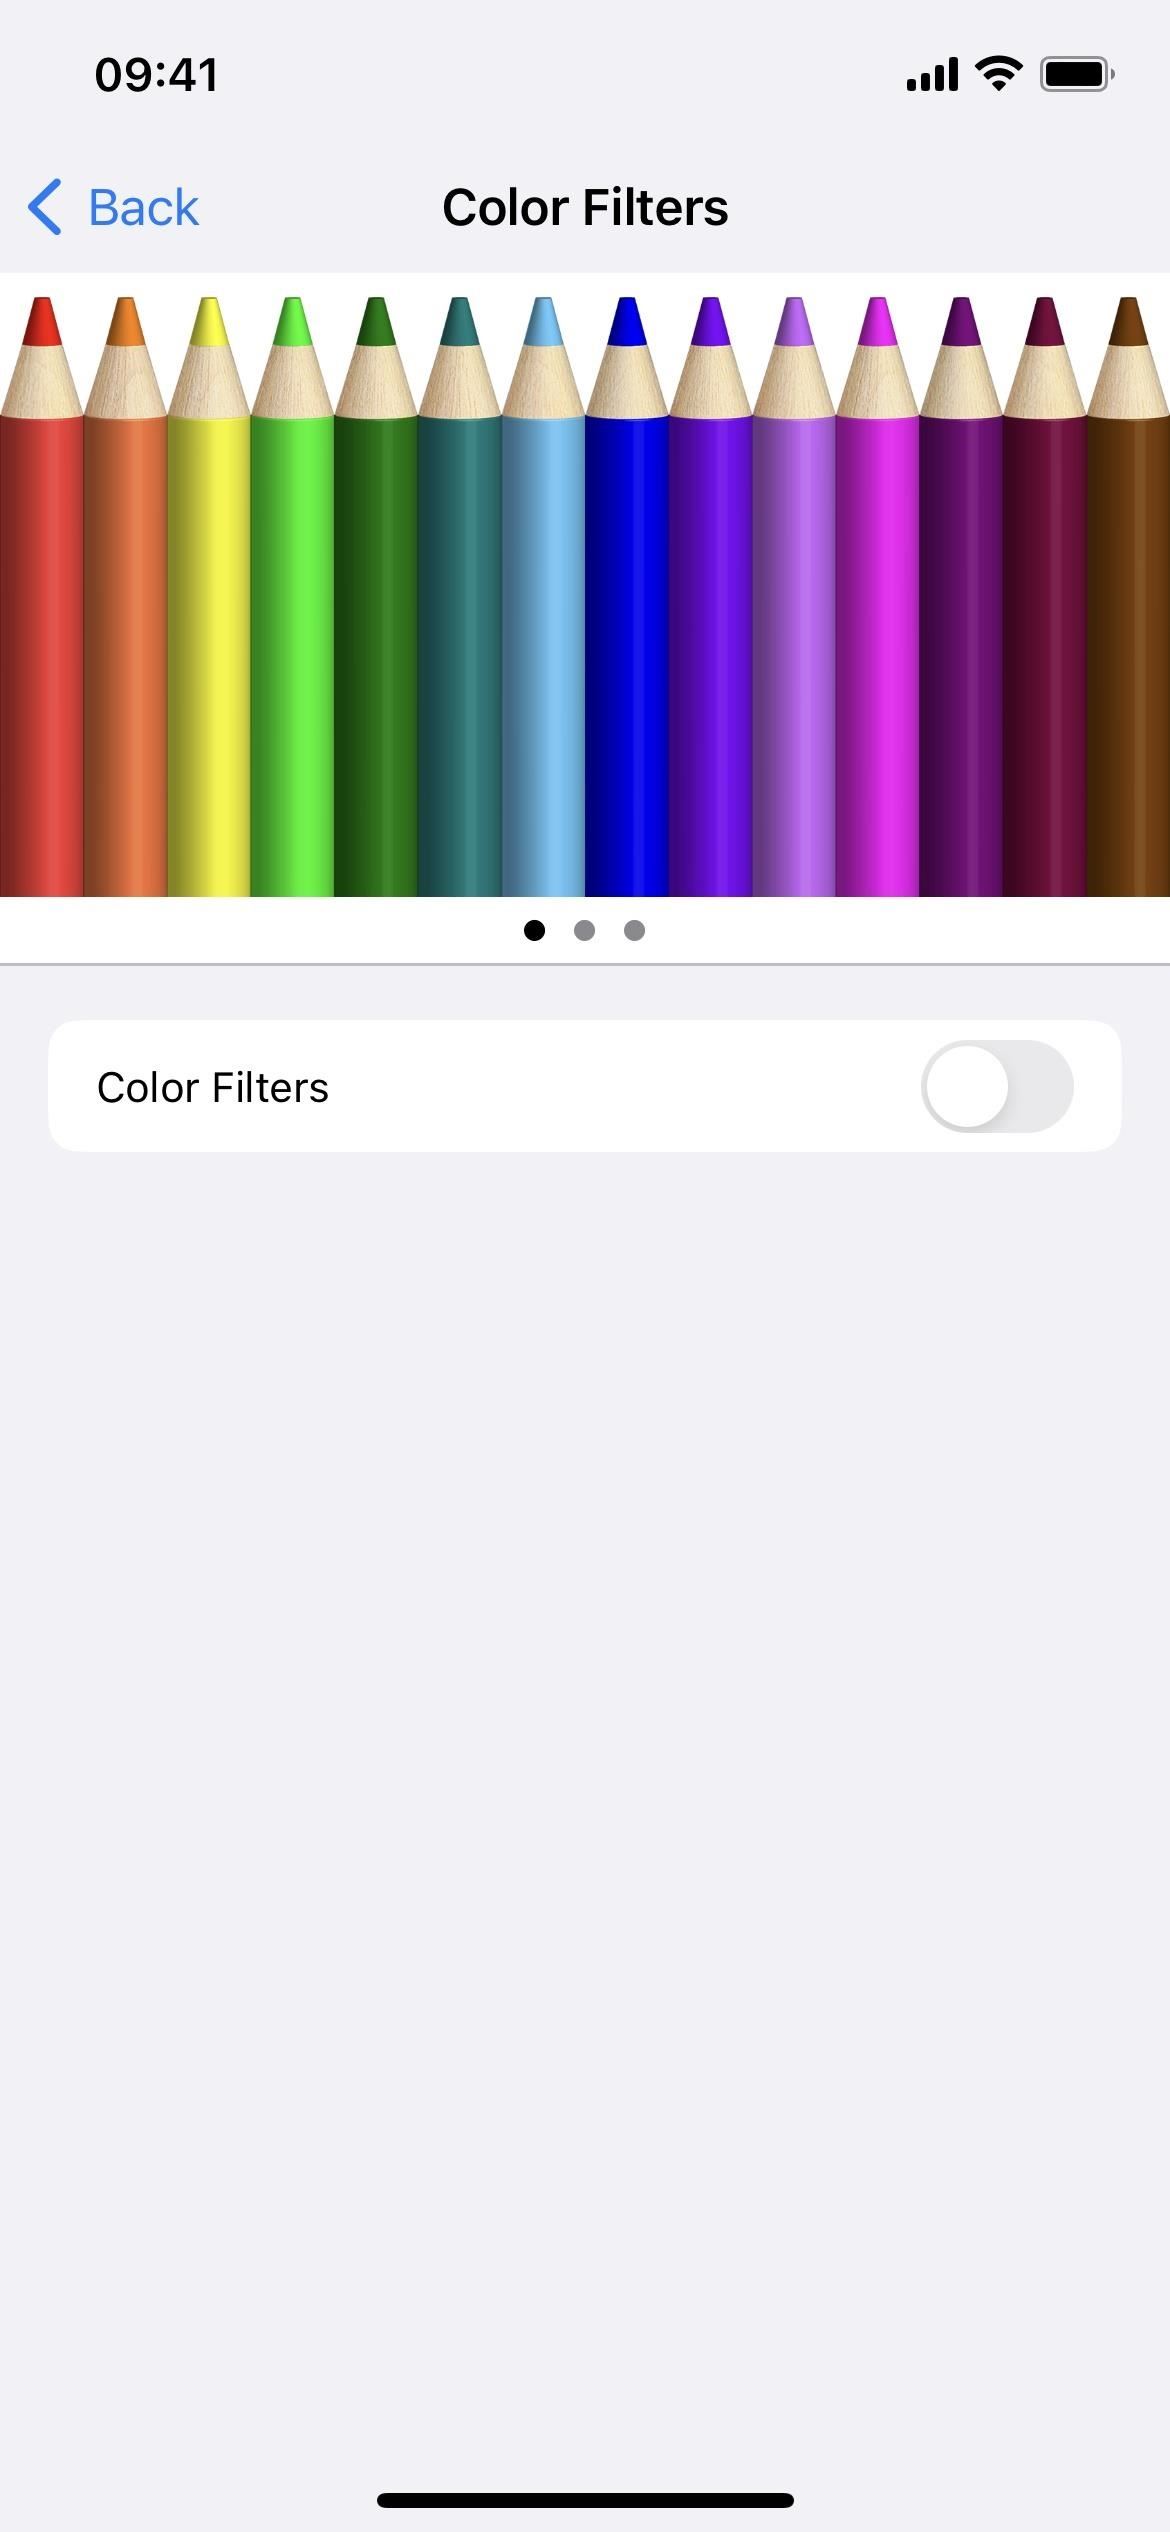 Customize Colors for All the Apps on Your iPhone to Match How You Use Them Most (Or Just for Fun)